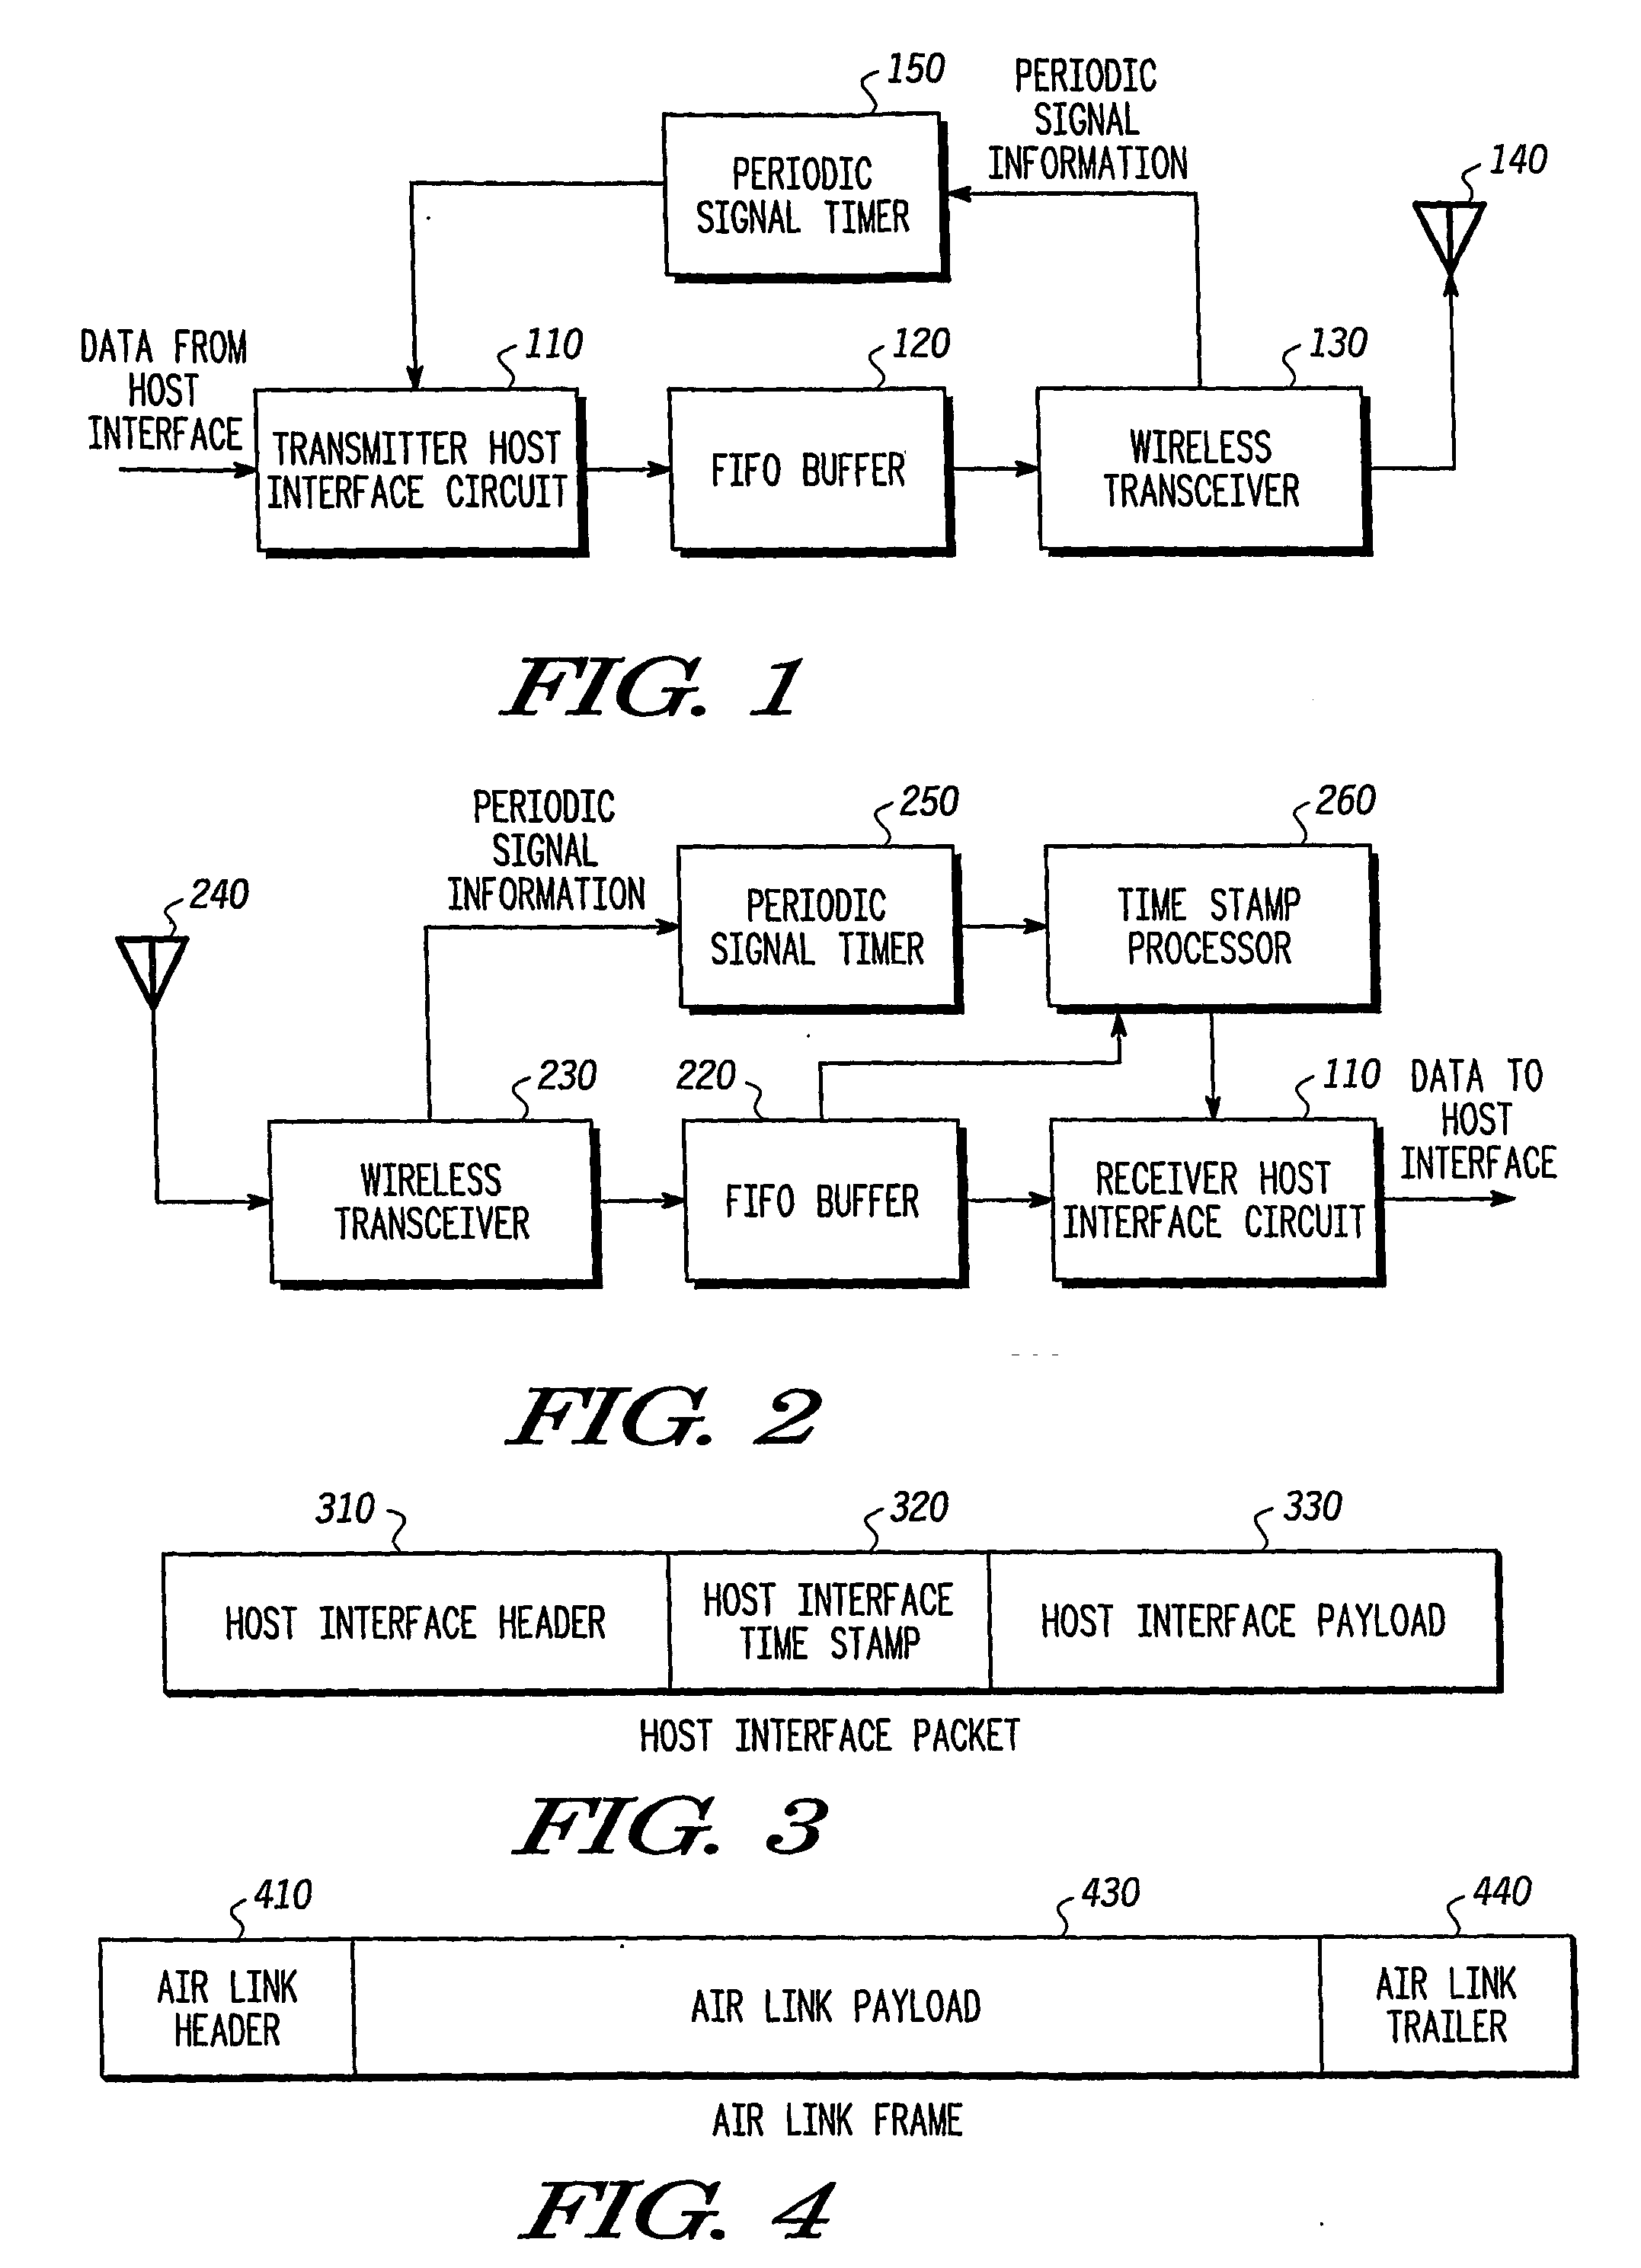 System and method for synchronization of isochronous data streams over a wireless communication link